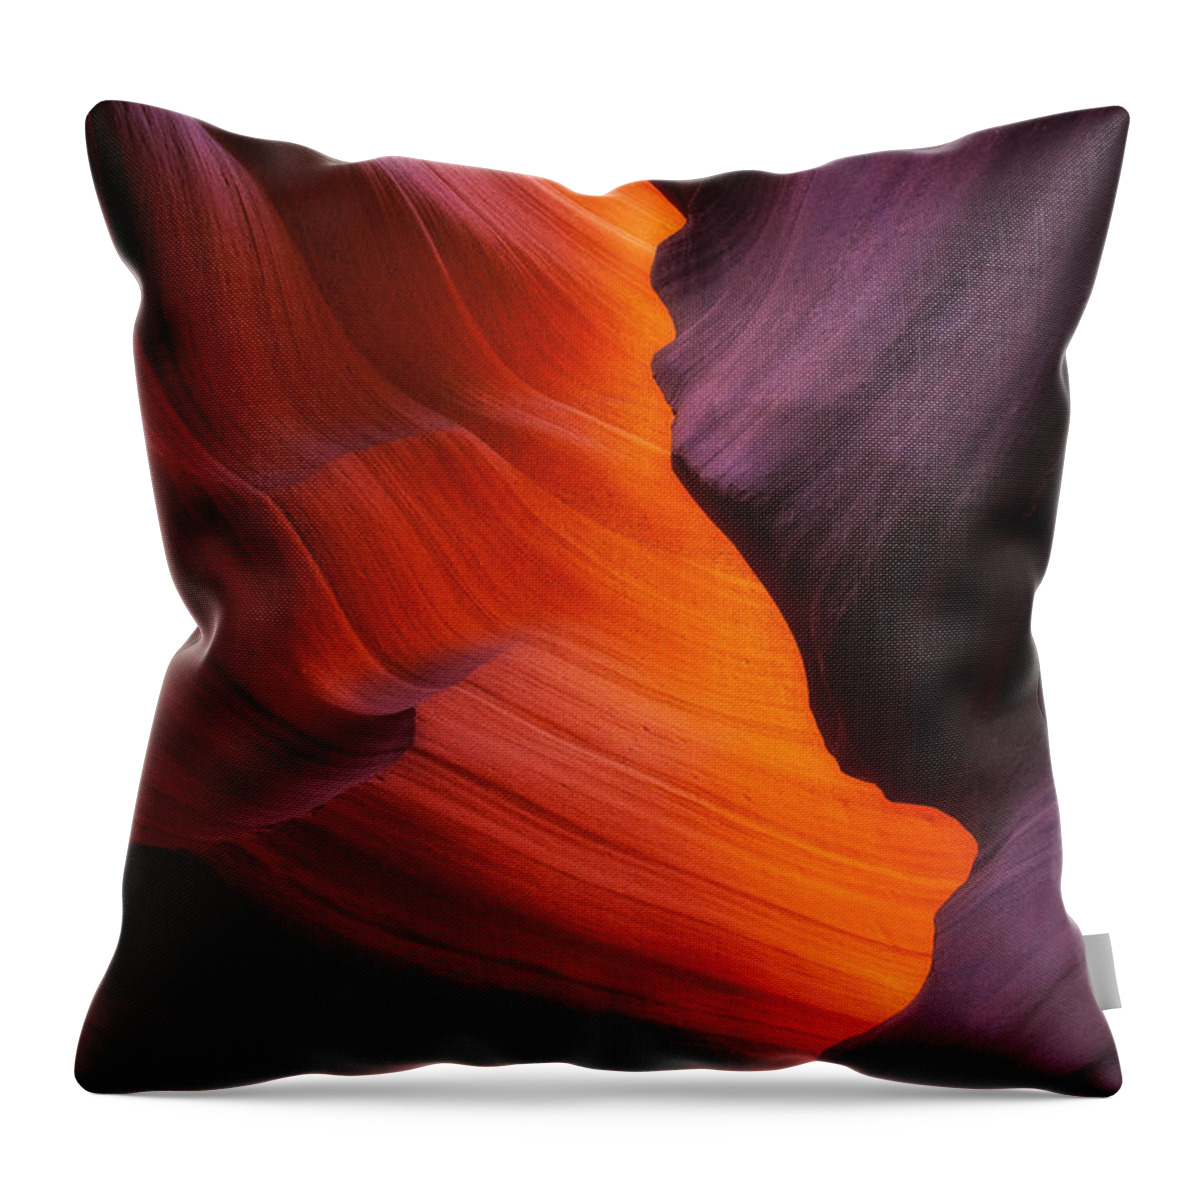 Sandstone Throw Pillow featuring the photograph The Fire Within by Darren White